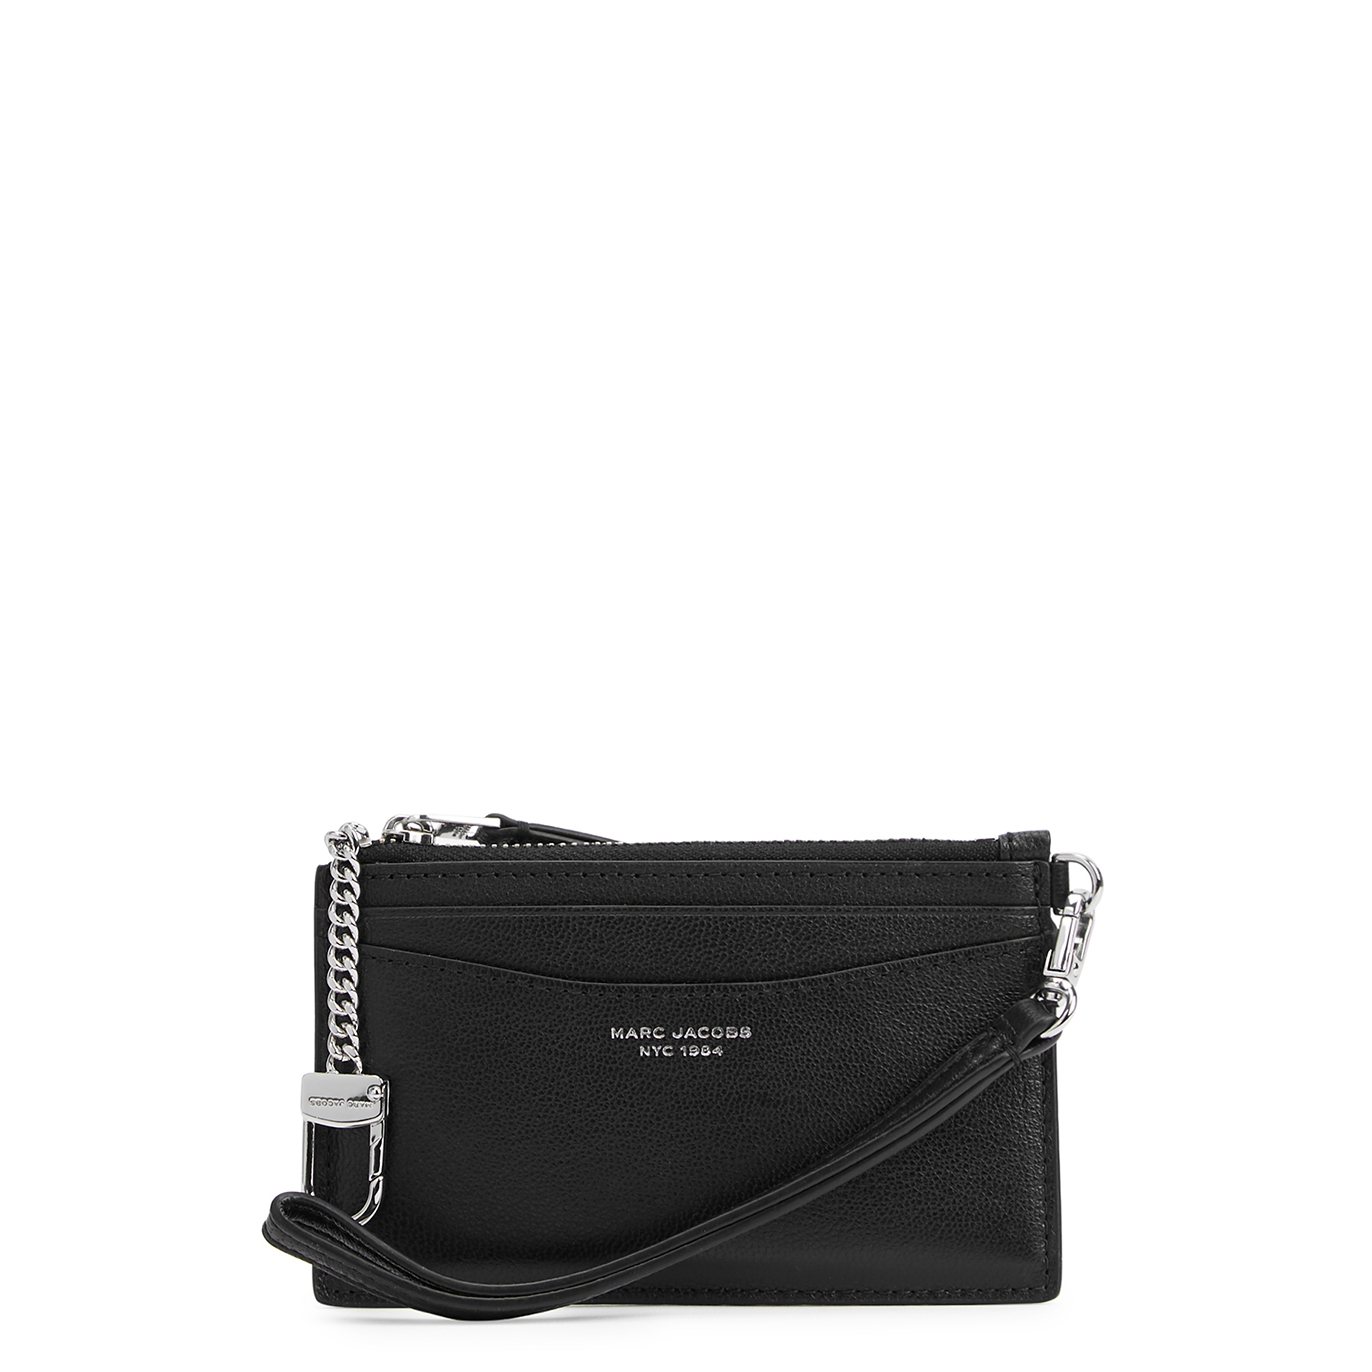 Marc Jacobs Slim 84 Black Leather Wallet - One Size